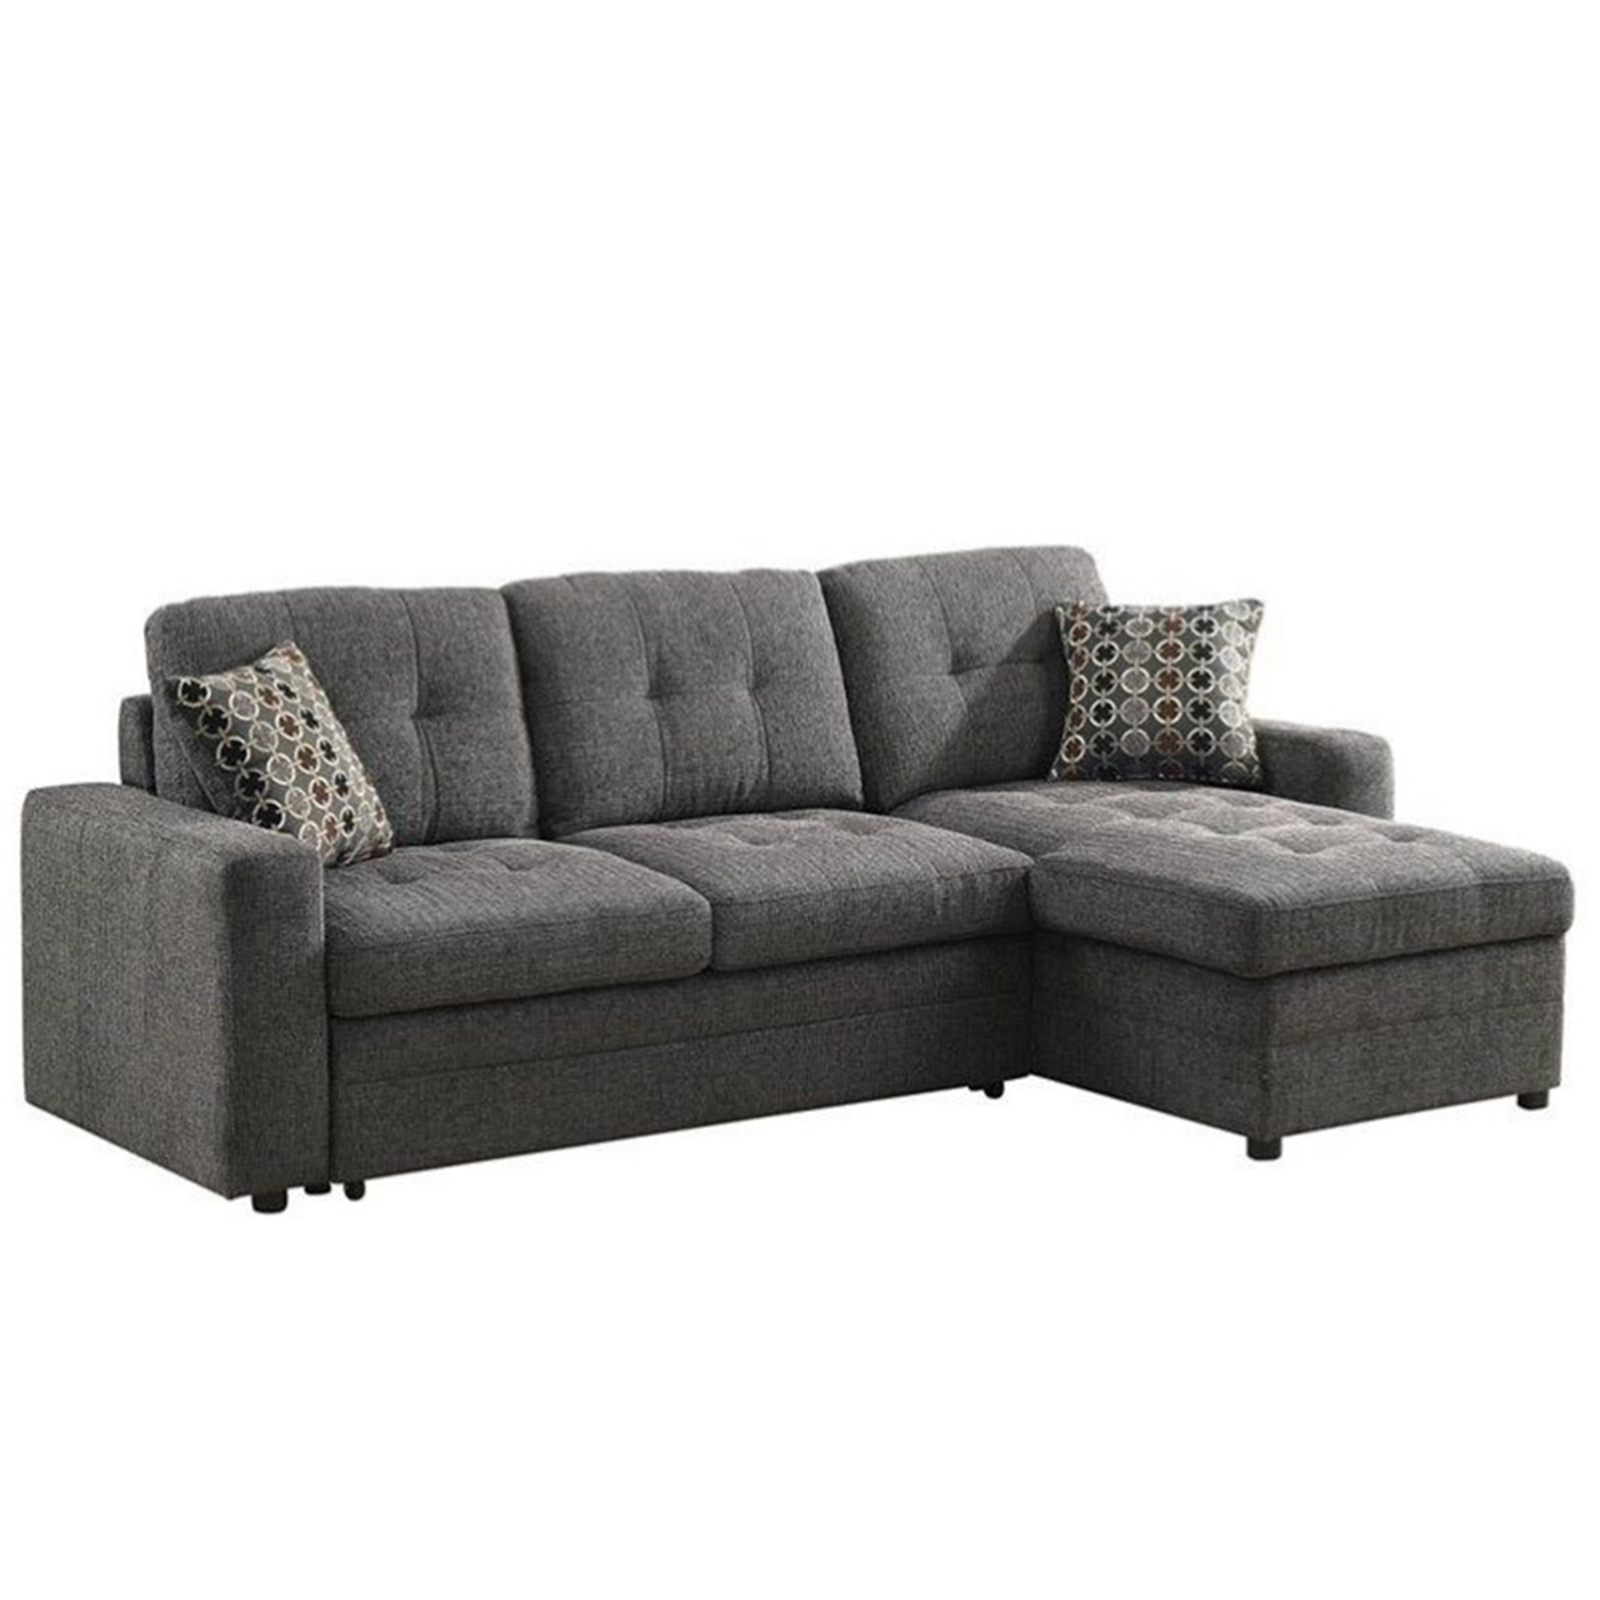 Coaster Gus Chaise Sectional Storage Sofa with Pull Out